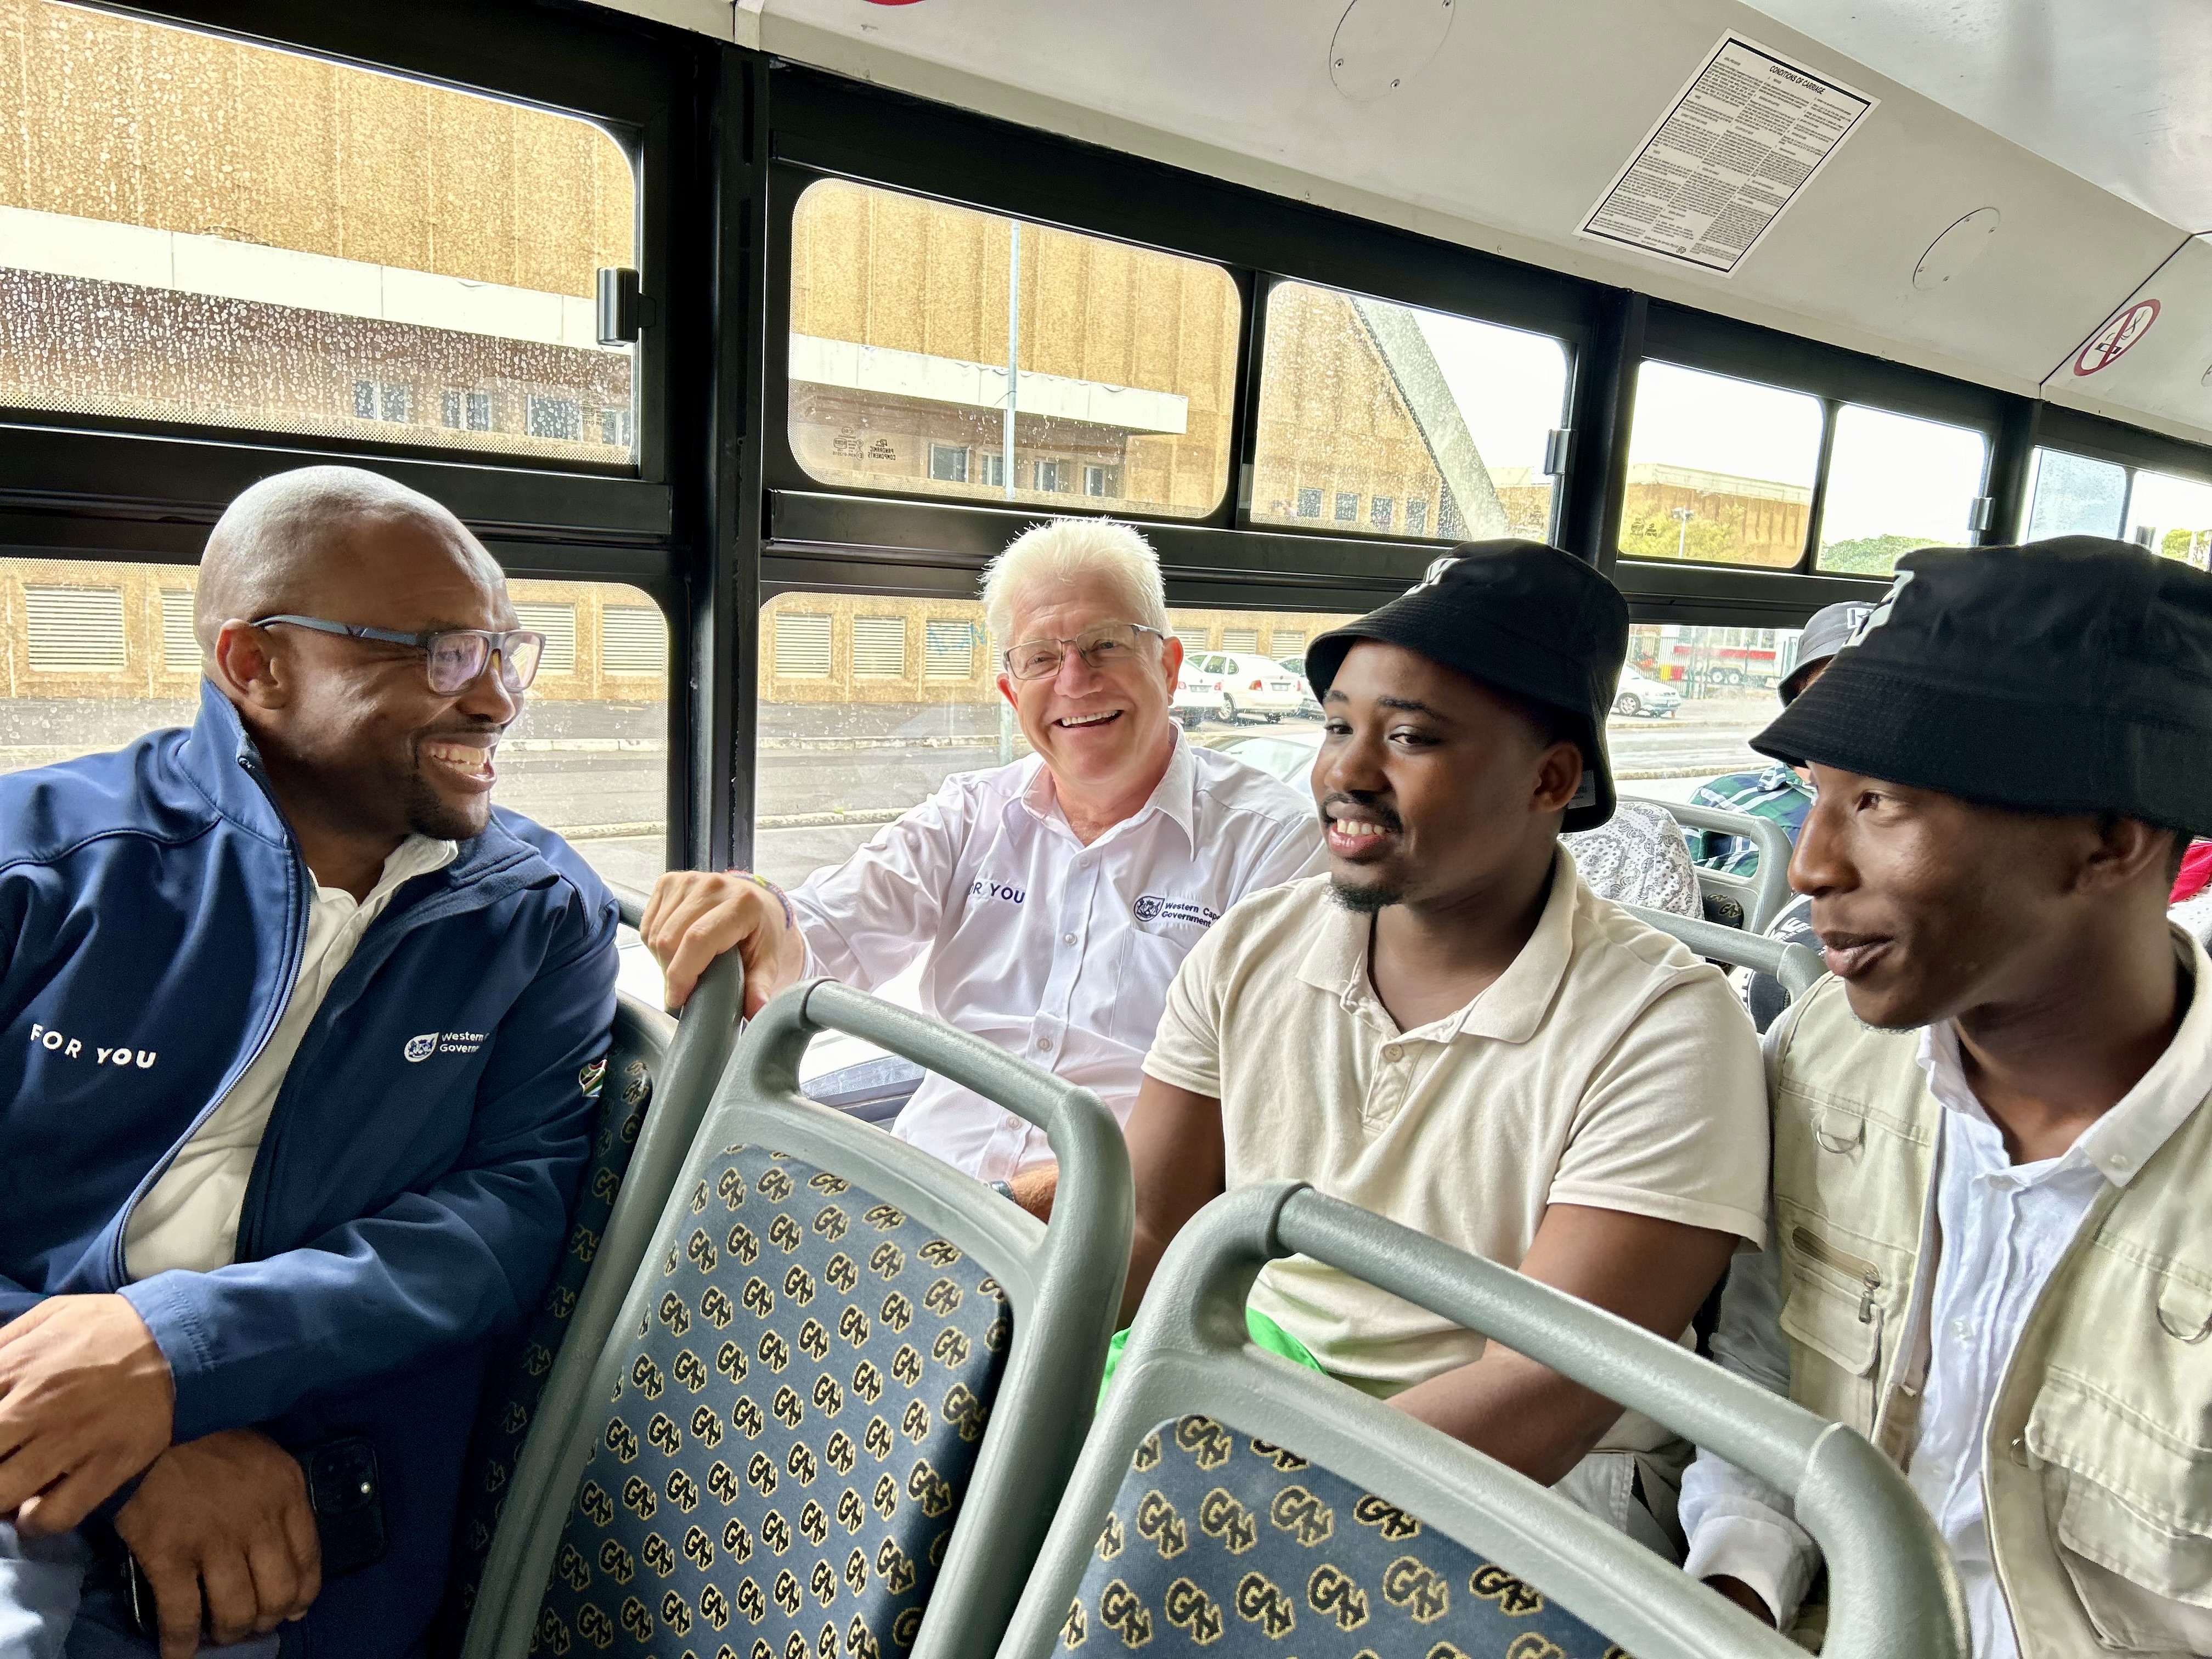 Mobility Minister Ricardo Mackenzie and Premier Alan Winde join interview candidates Latita Memani and Yongama Sondlo using their Getting YOU to Work free transport voucher.